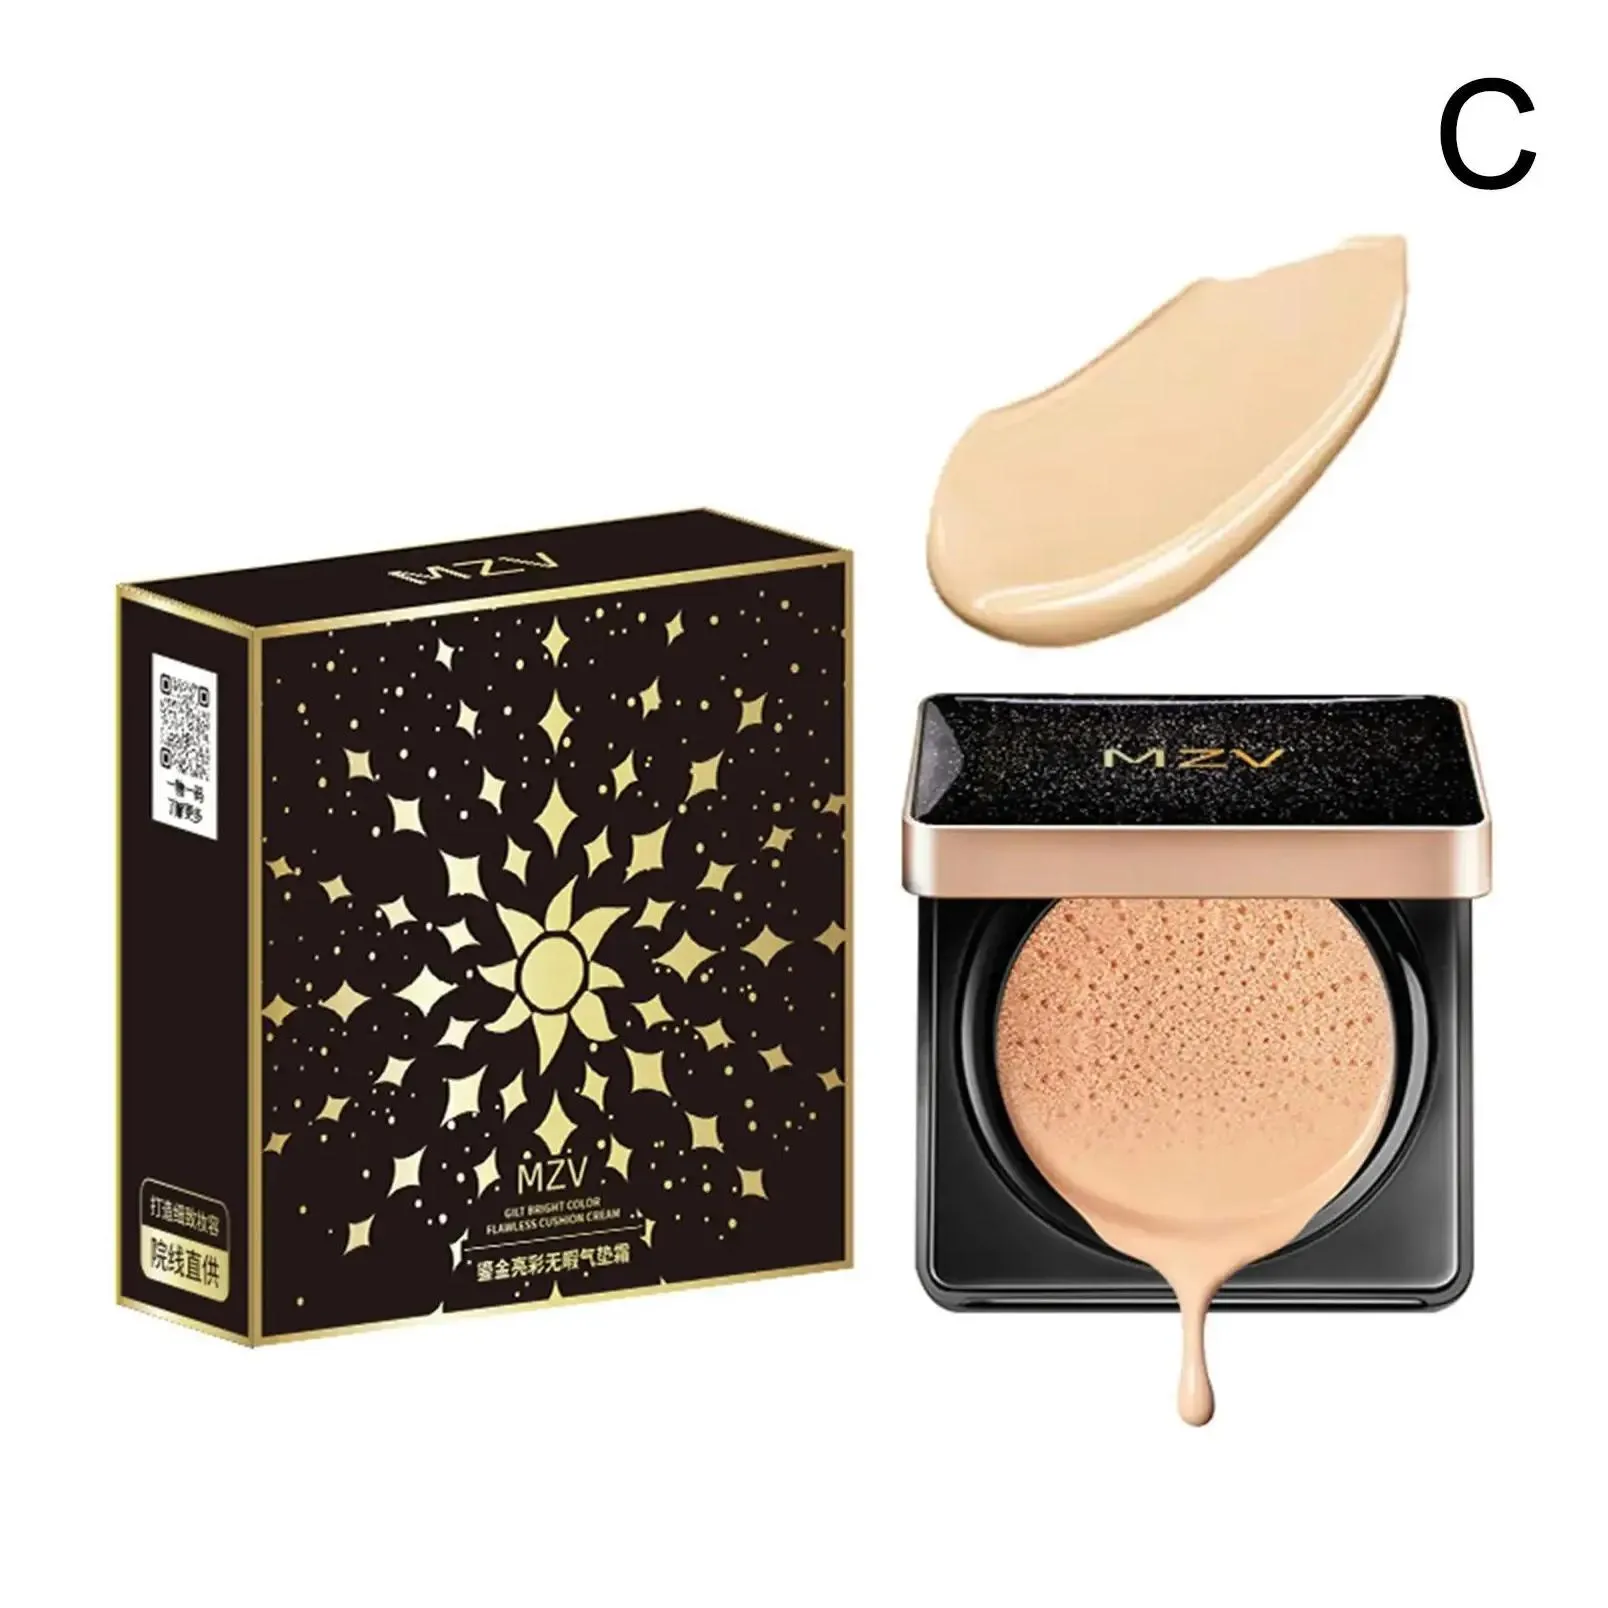 mzv foundation air cushion bb cream oil control waterproof makeup soft base whitening airpermeable face tone concealer 240220